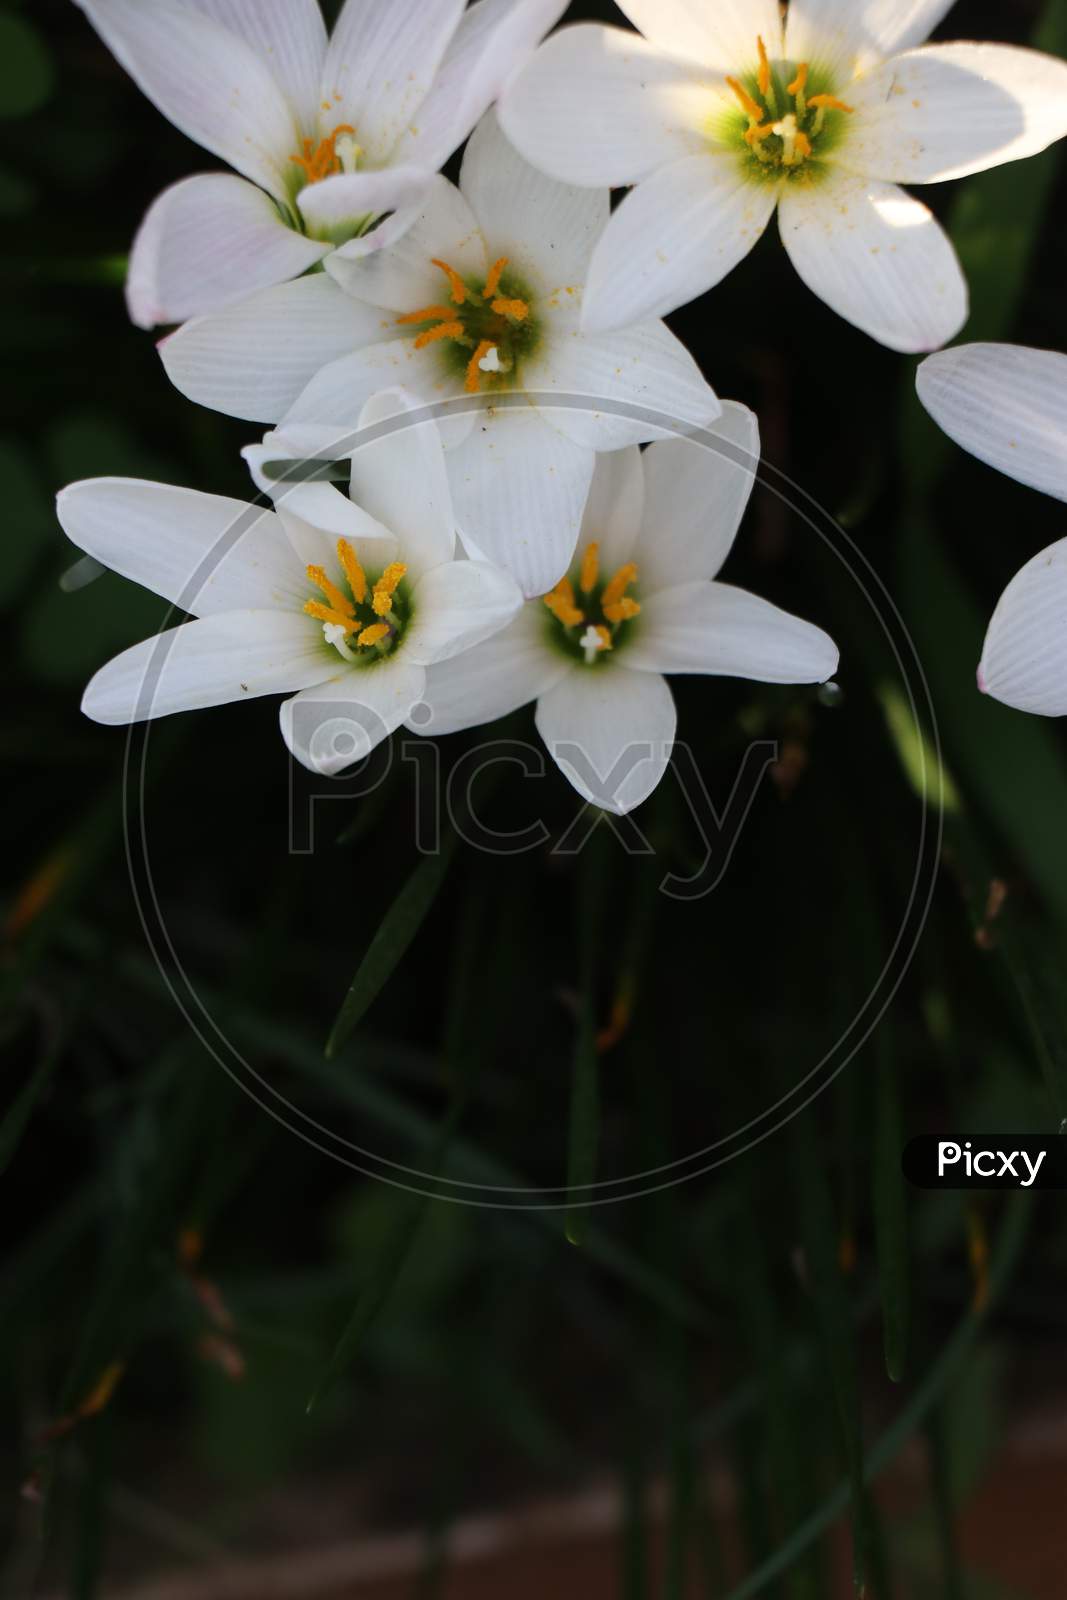 Beautiful White Lily Which Belongs To Species Lilium With Copy Space